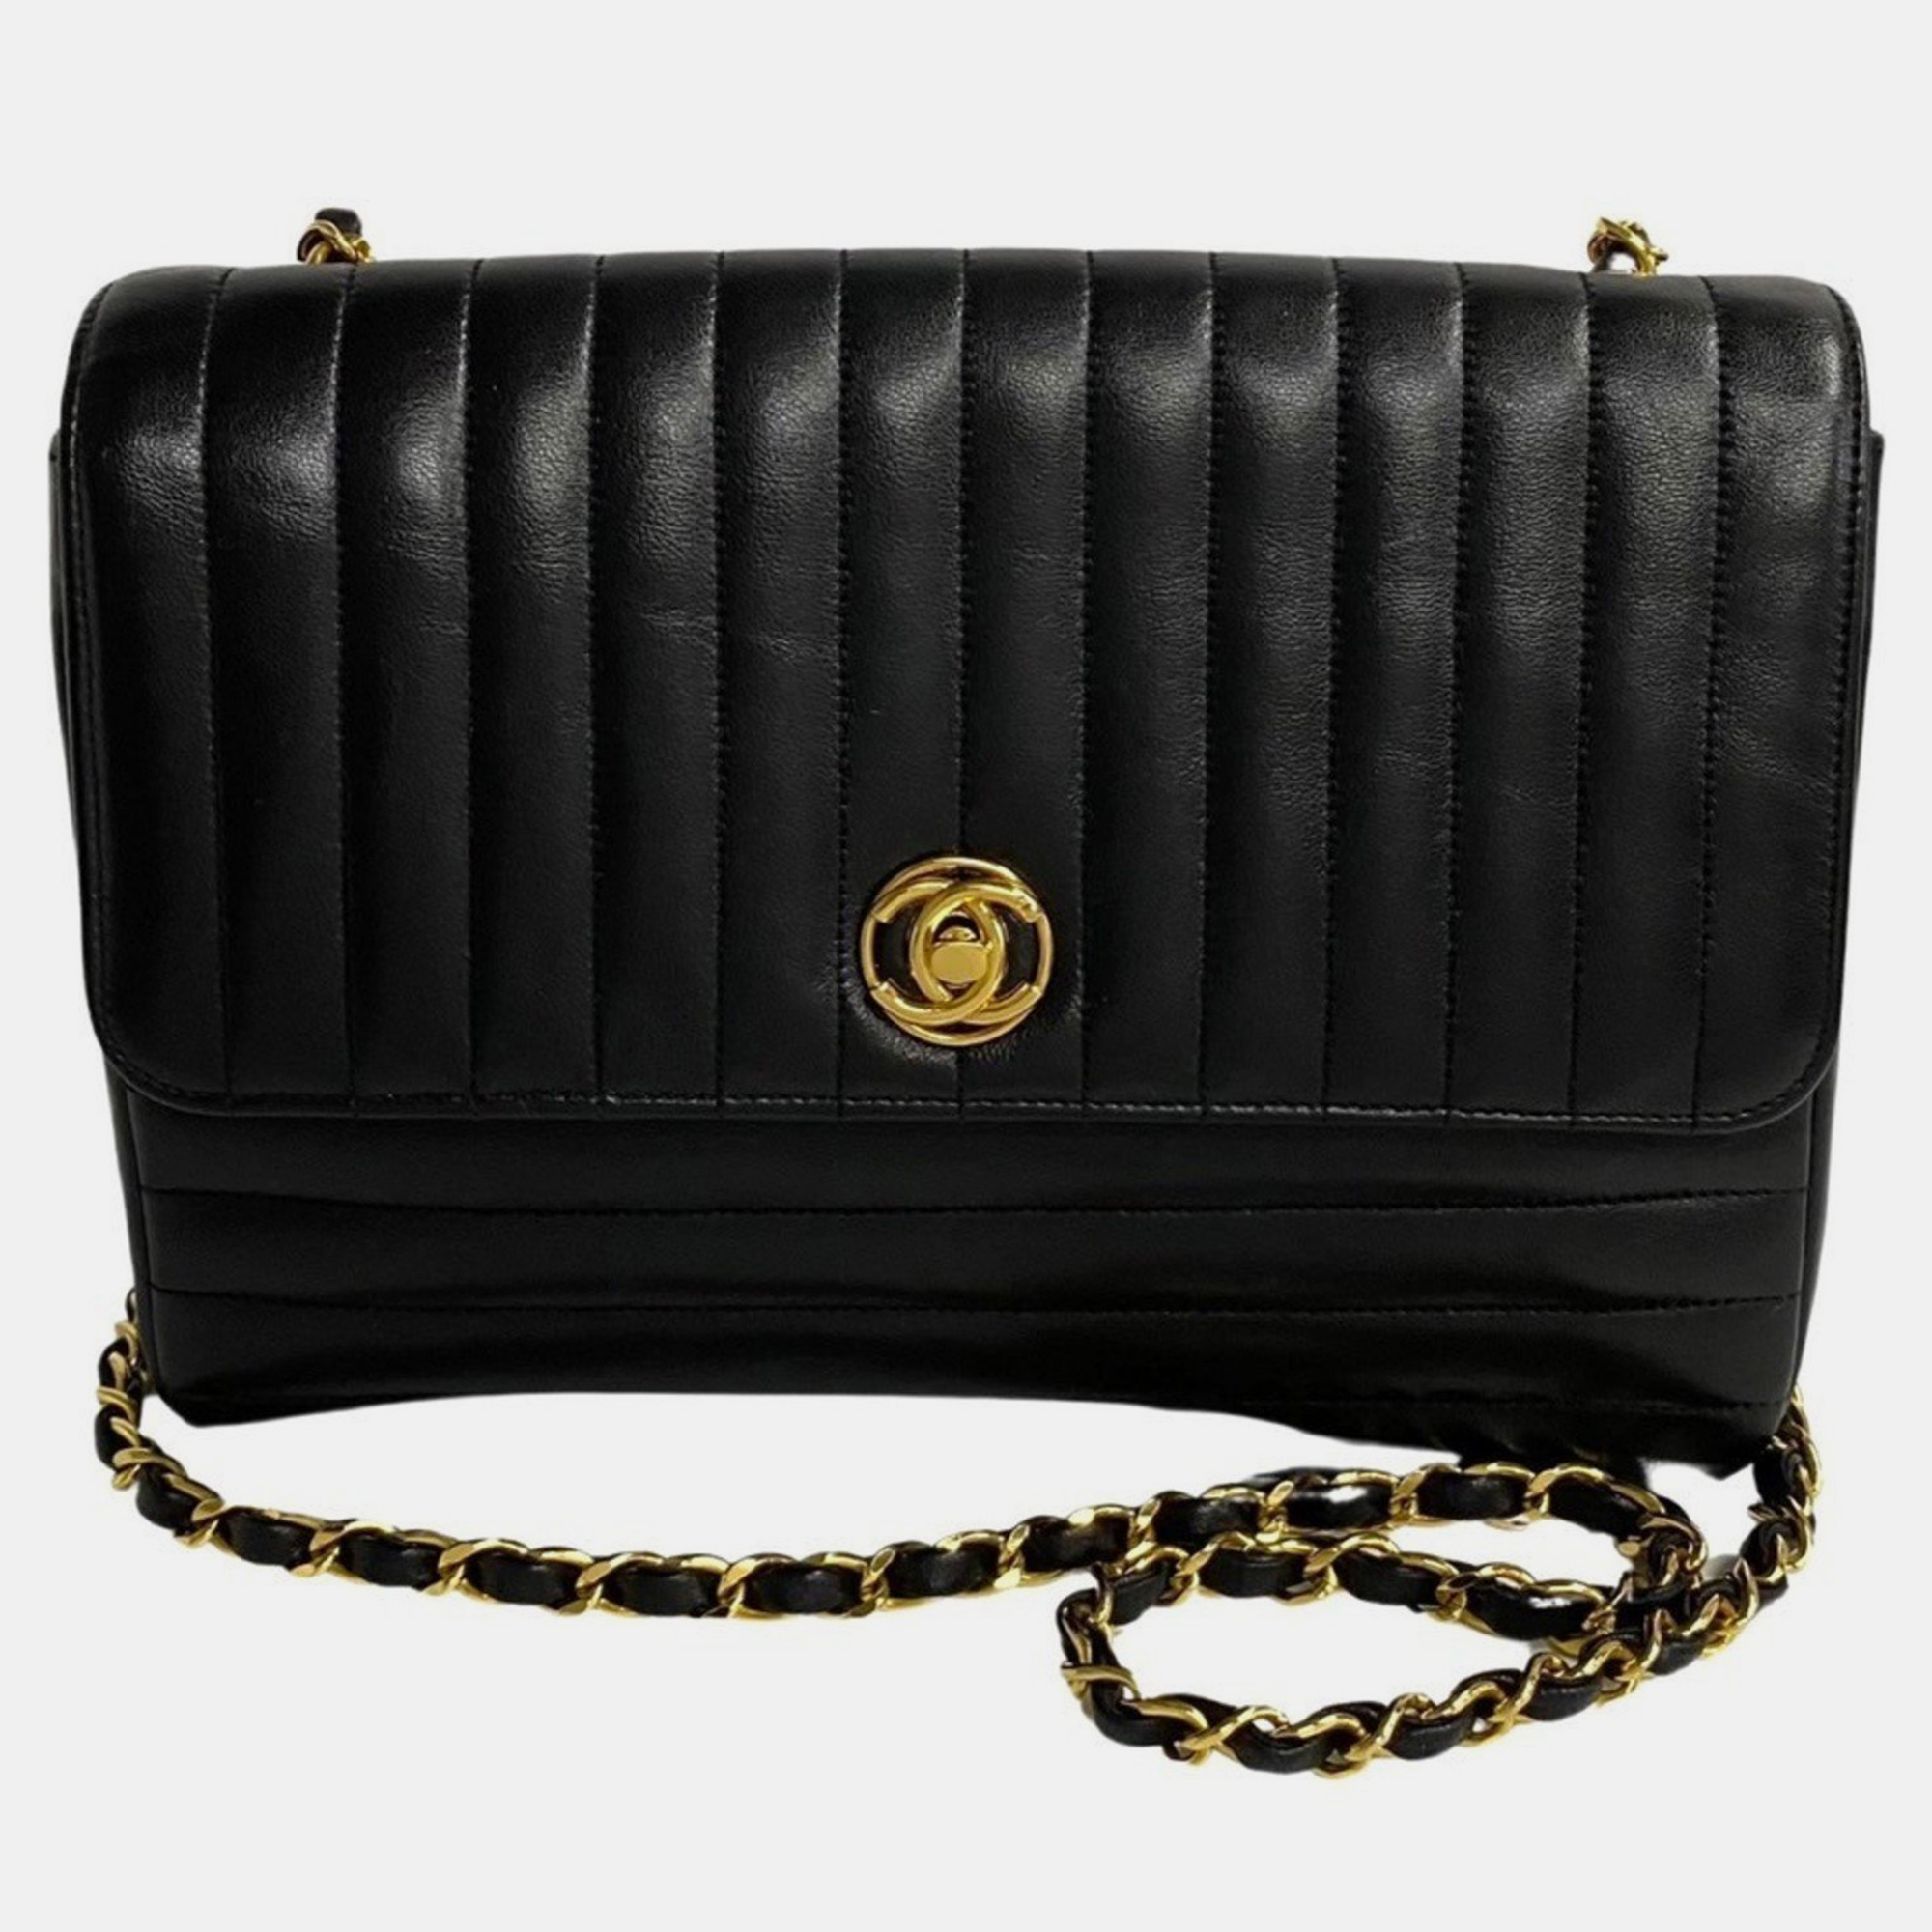 Chanel black vertical quilted lambskin flap bag